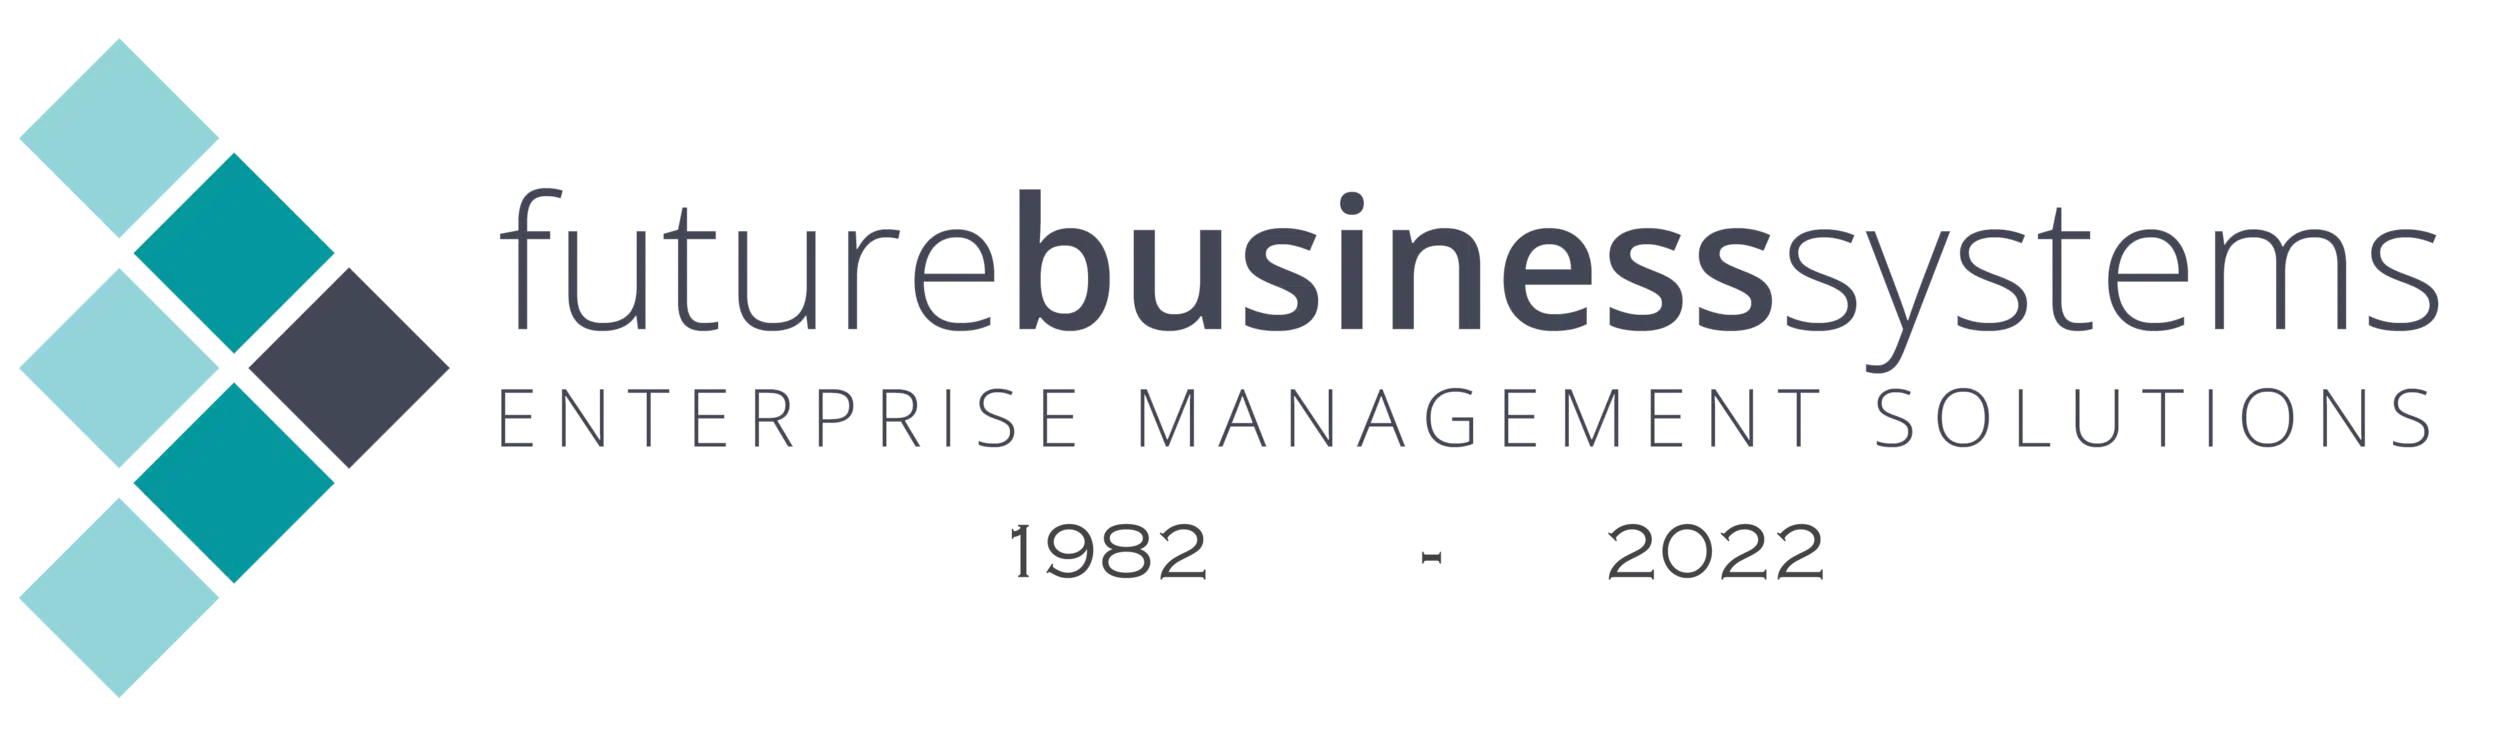 Future Business Systems Logo